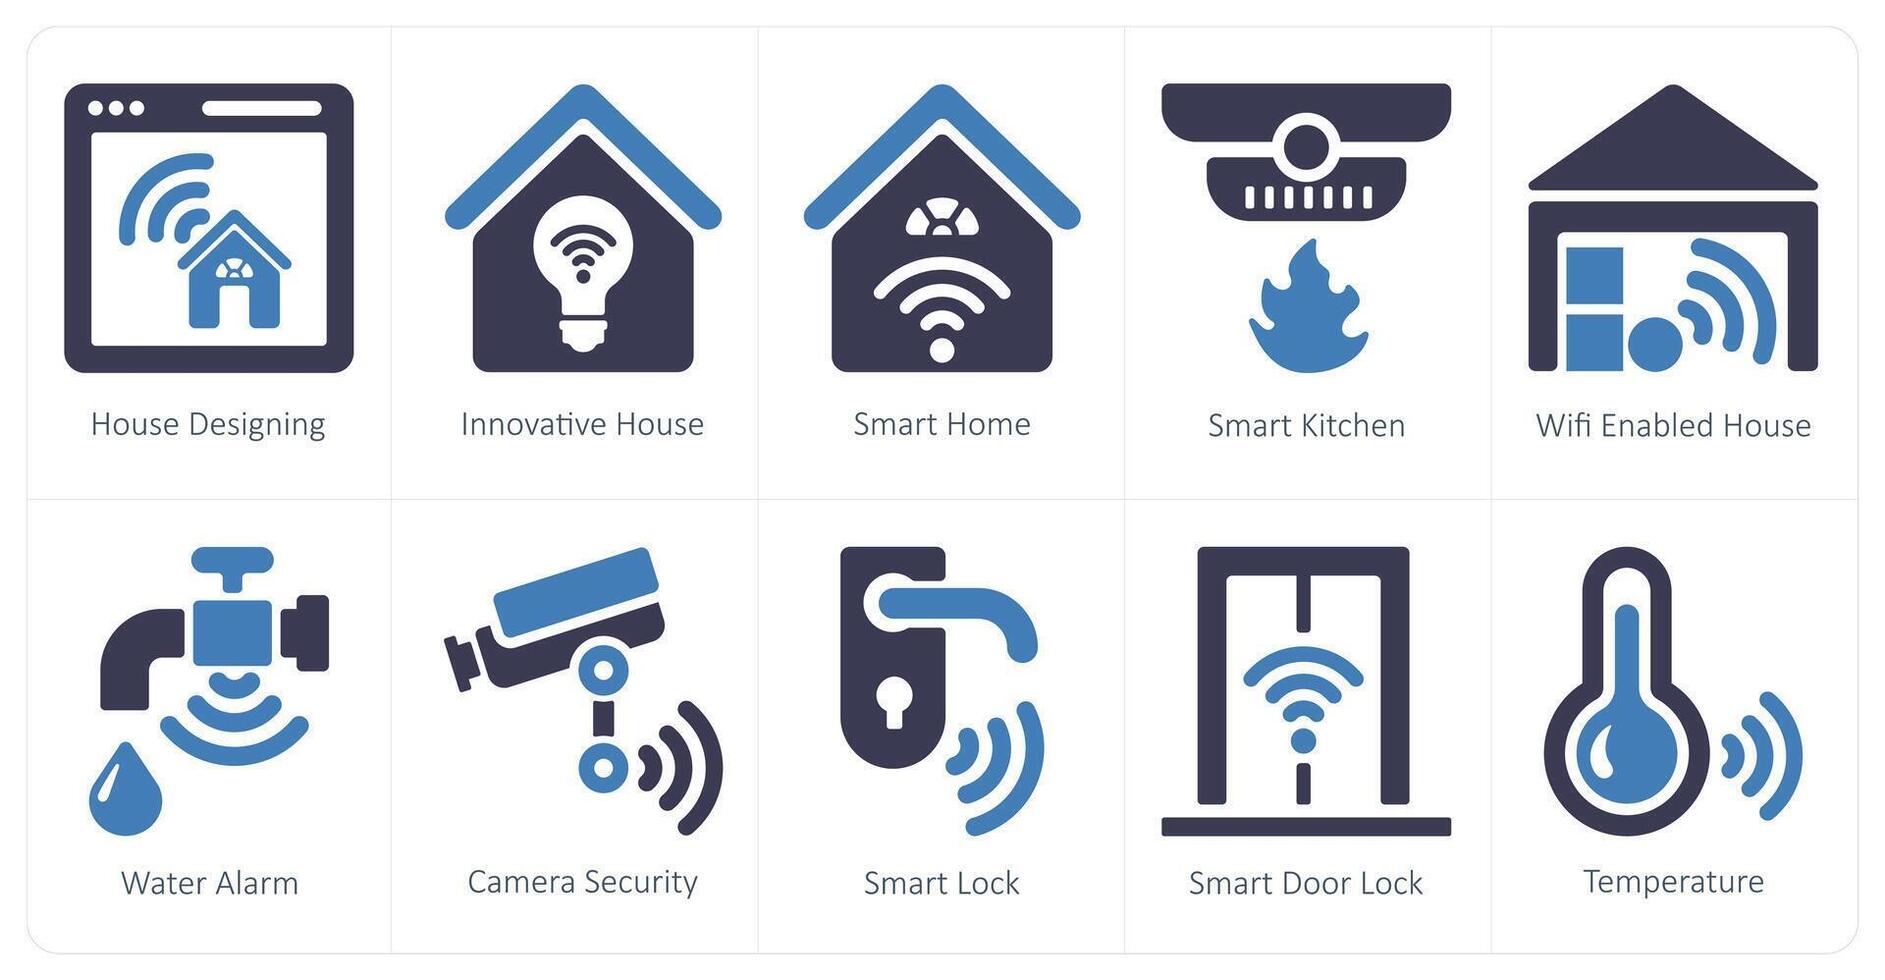 A set of 10 Smart Home icons as house designing, innovative house, smart home vector